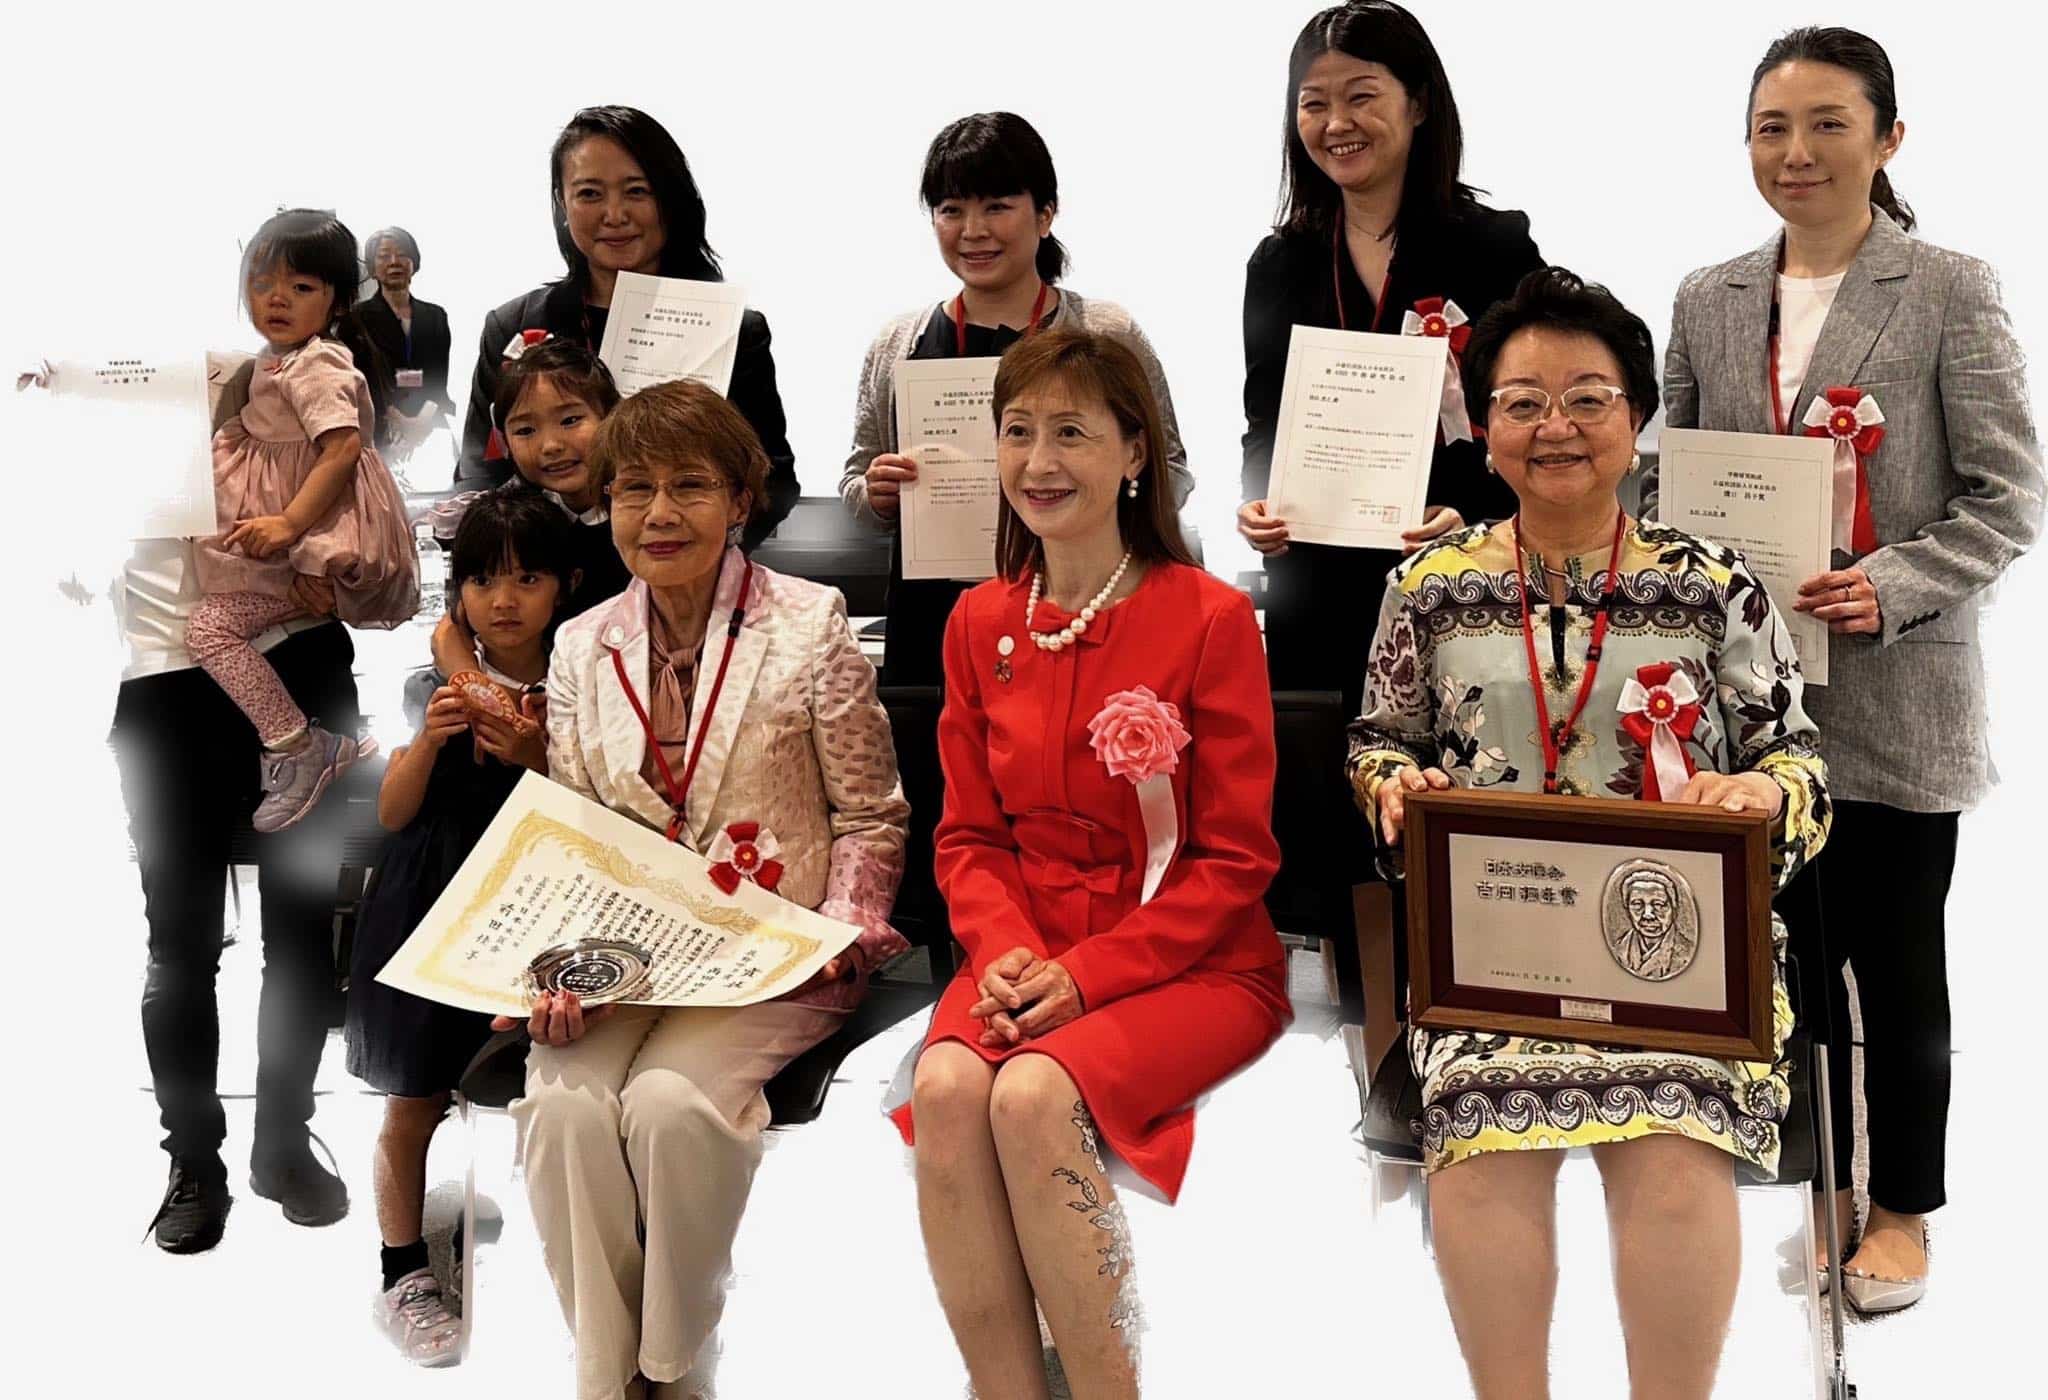 Award winners at the 68th Annual Meeting of the Japan Medical Workers' Association held in Utsunomiya on May 21st.